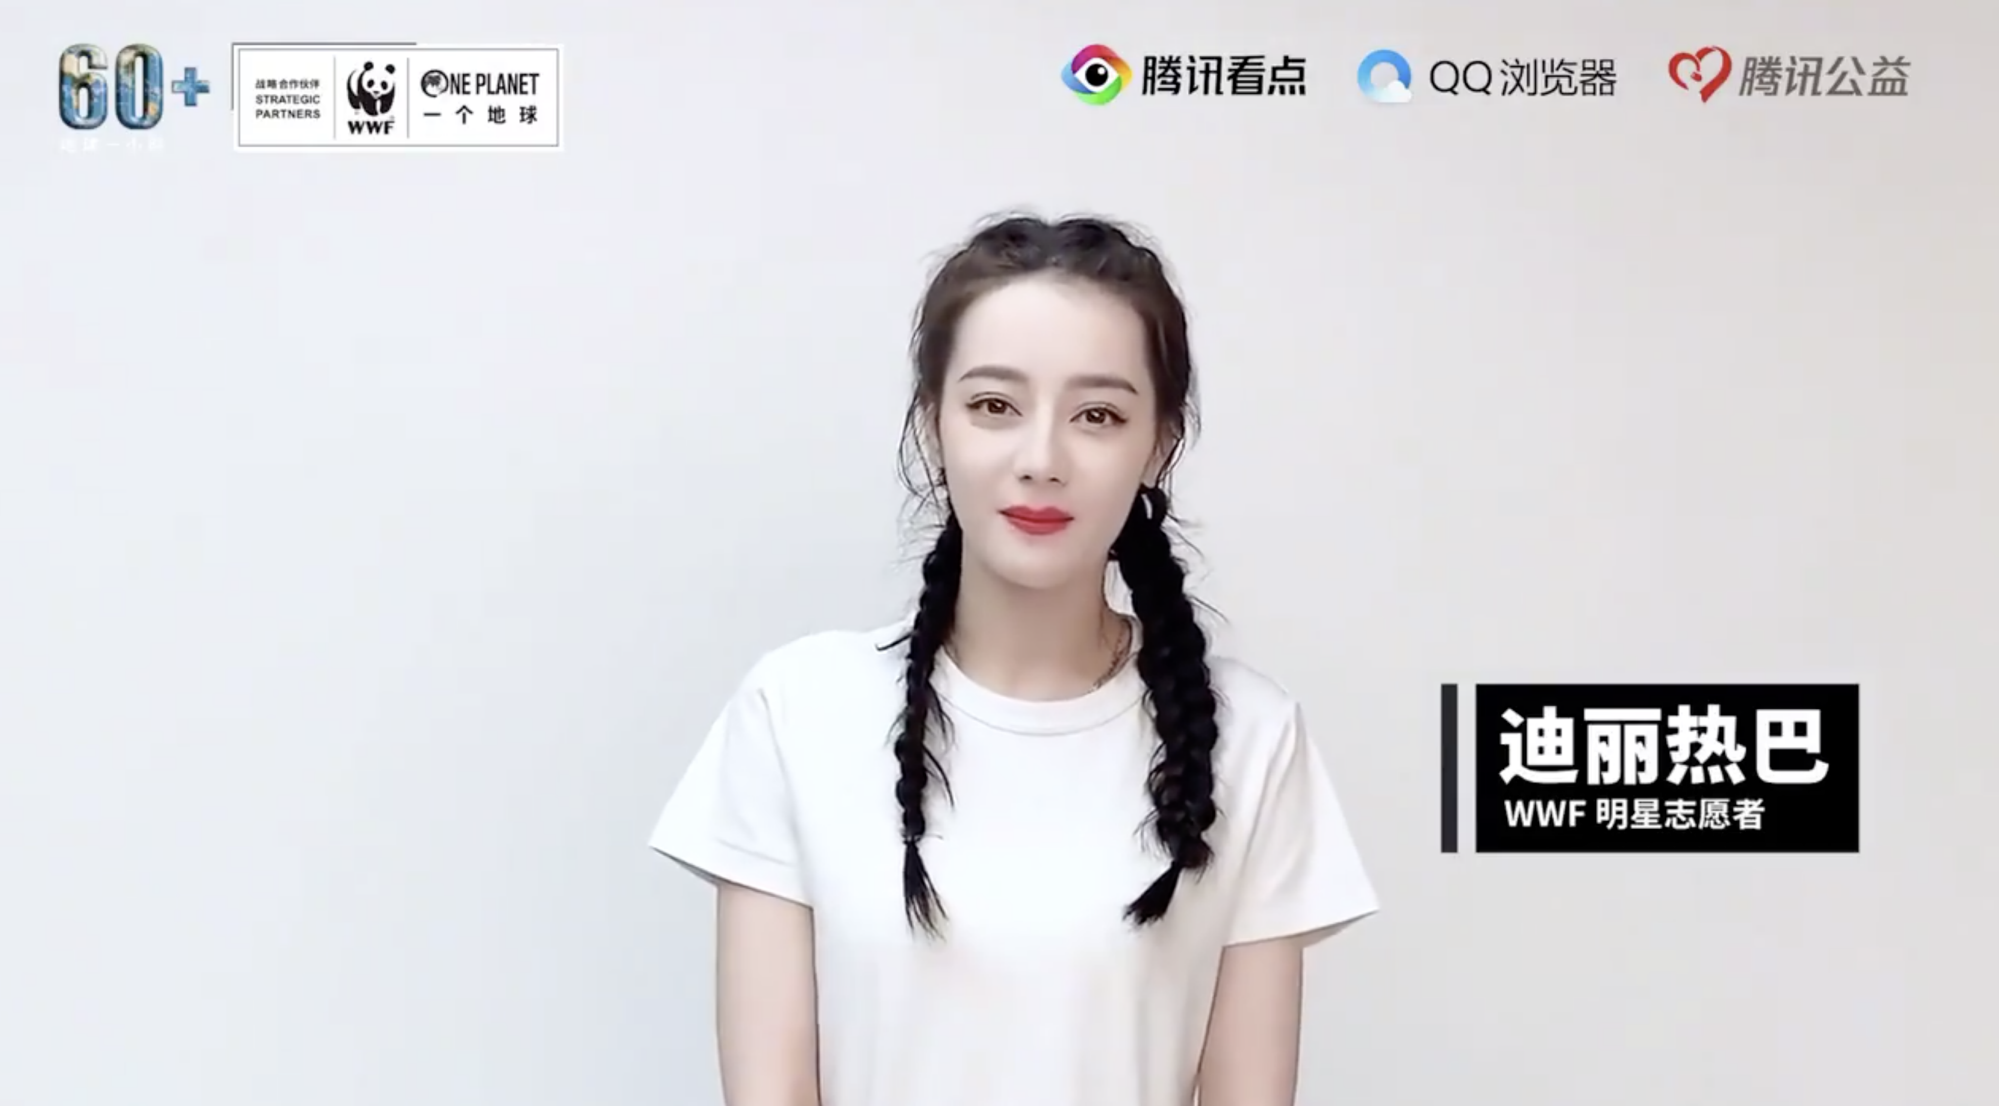 Dilraba Dilmurat, Park Seo-Joon support Earth Hour with special messages